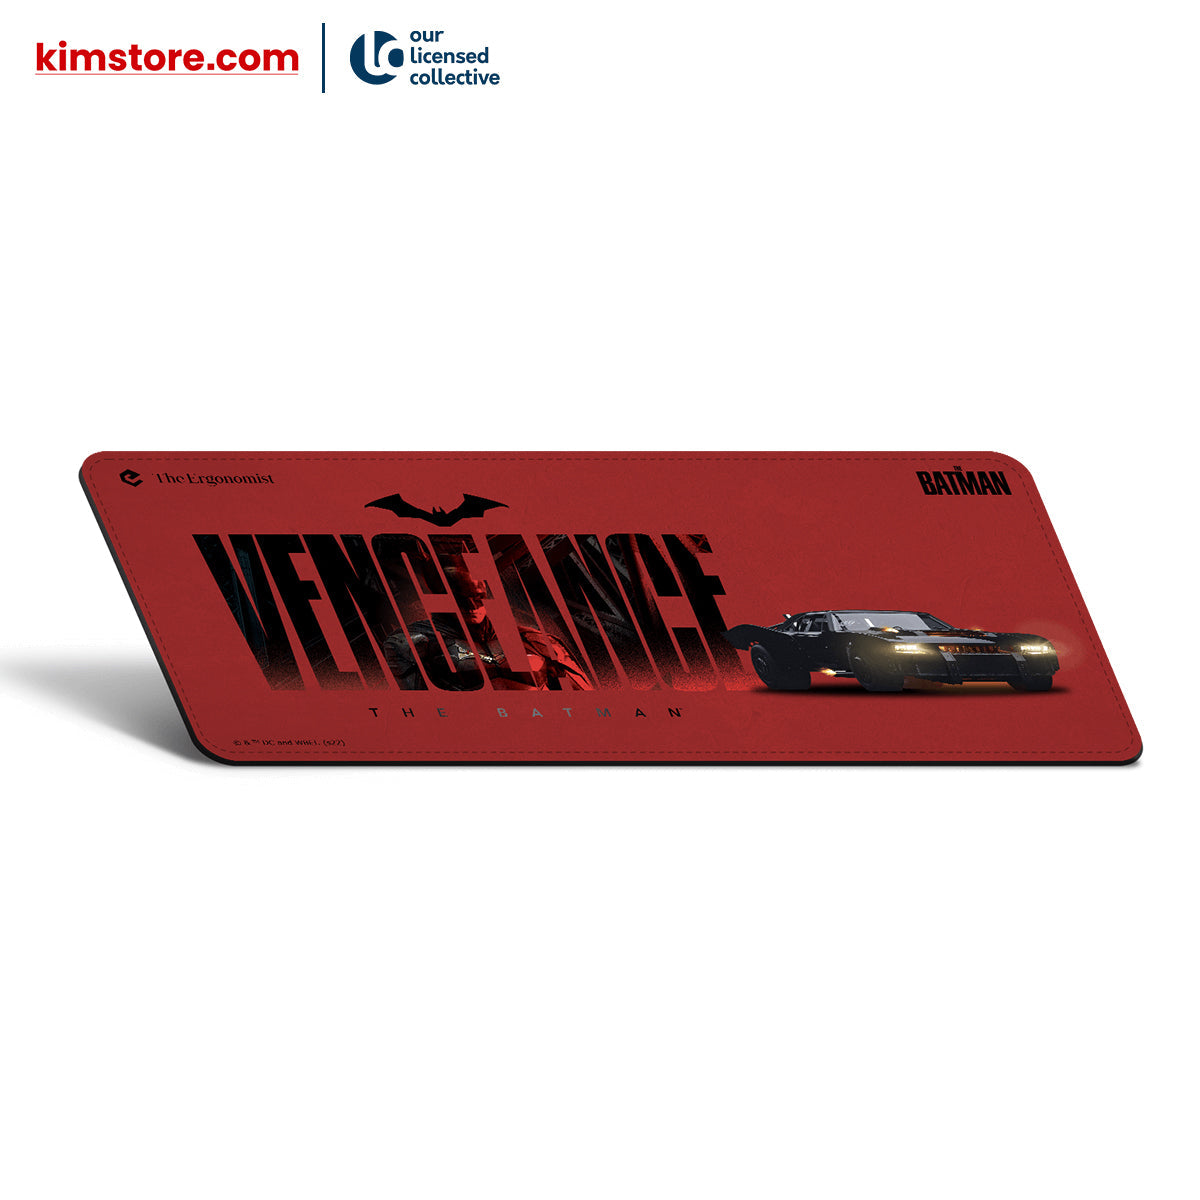 THE BATMAN Extended Gaming Mouse Mat: 1st Collection